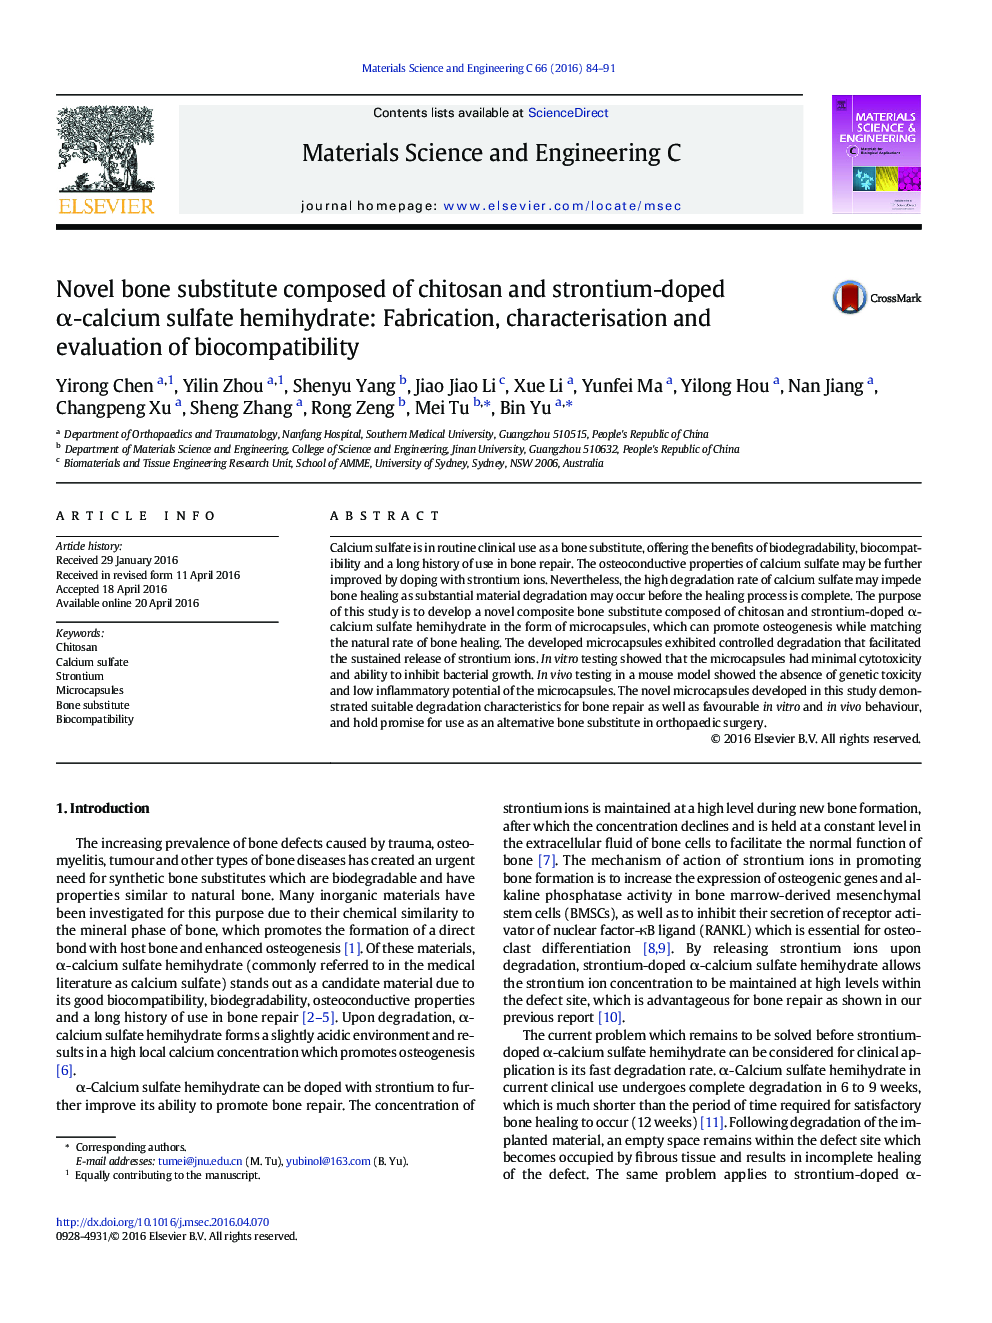 Novel bone substitute composed of chitosan and strontium-doped Î±-calcium sulfate hemihydrate: Fabrication, characterisation and evaluation of biocompatibility